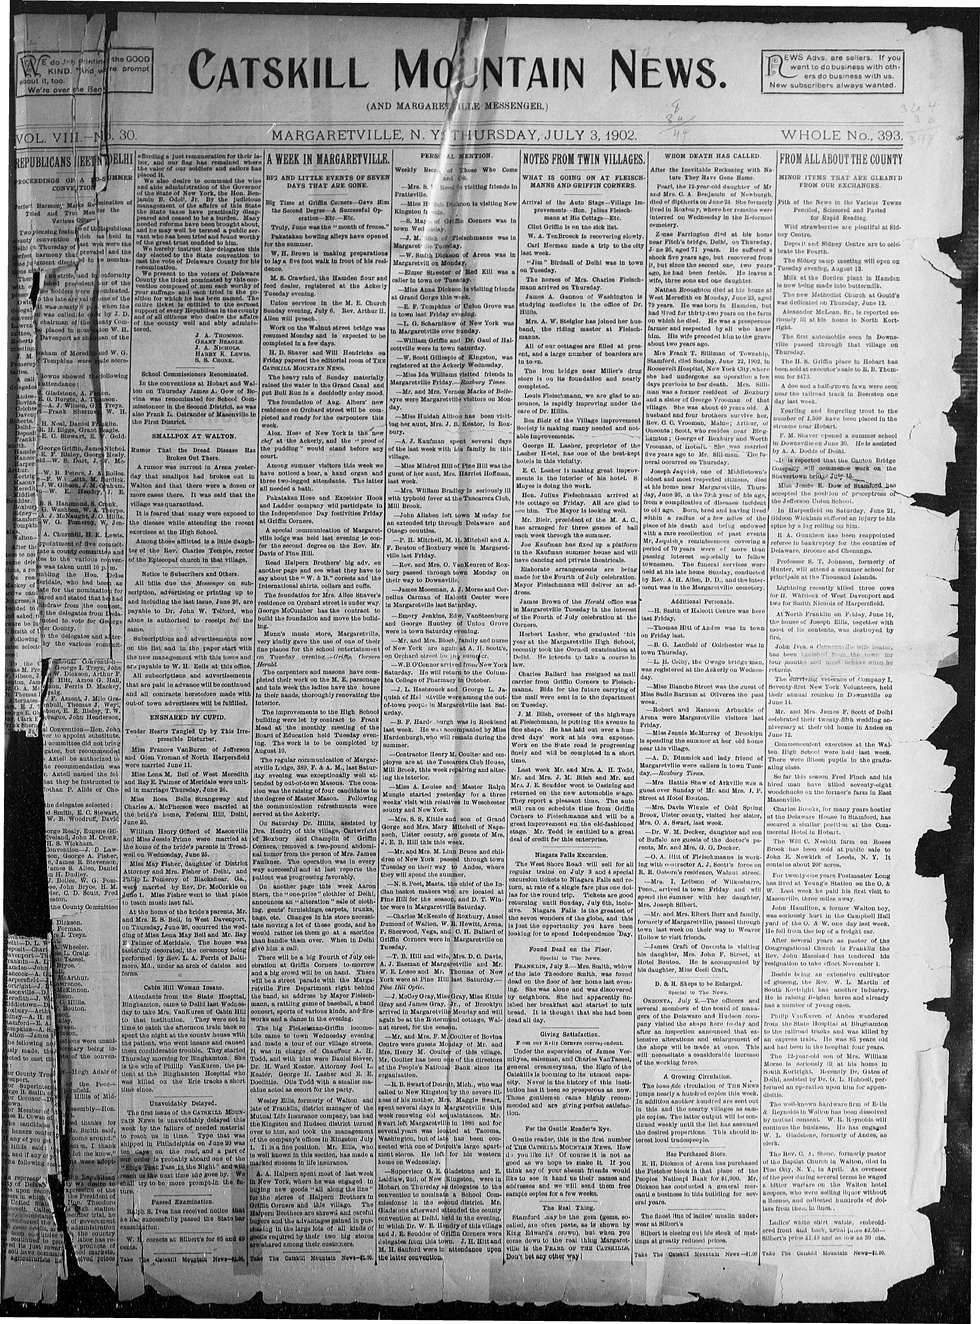 The Catskill Mountain News was published in Margaretville from 1902 until January 2020.